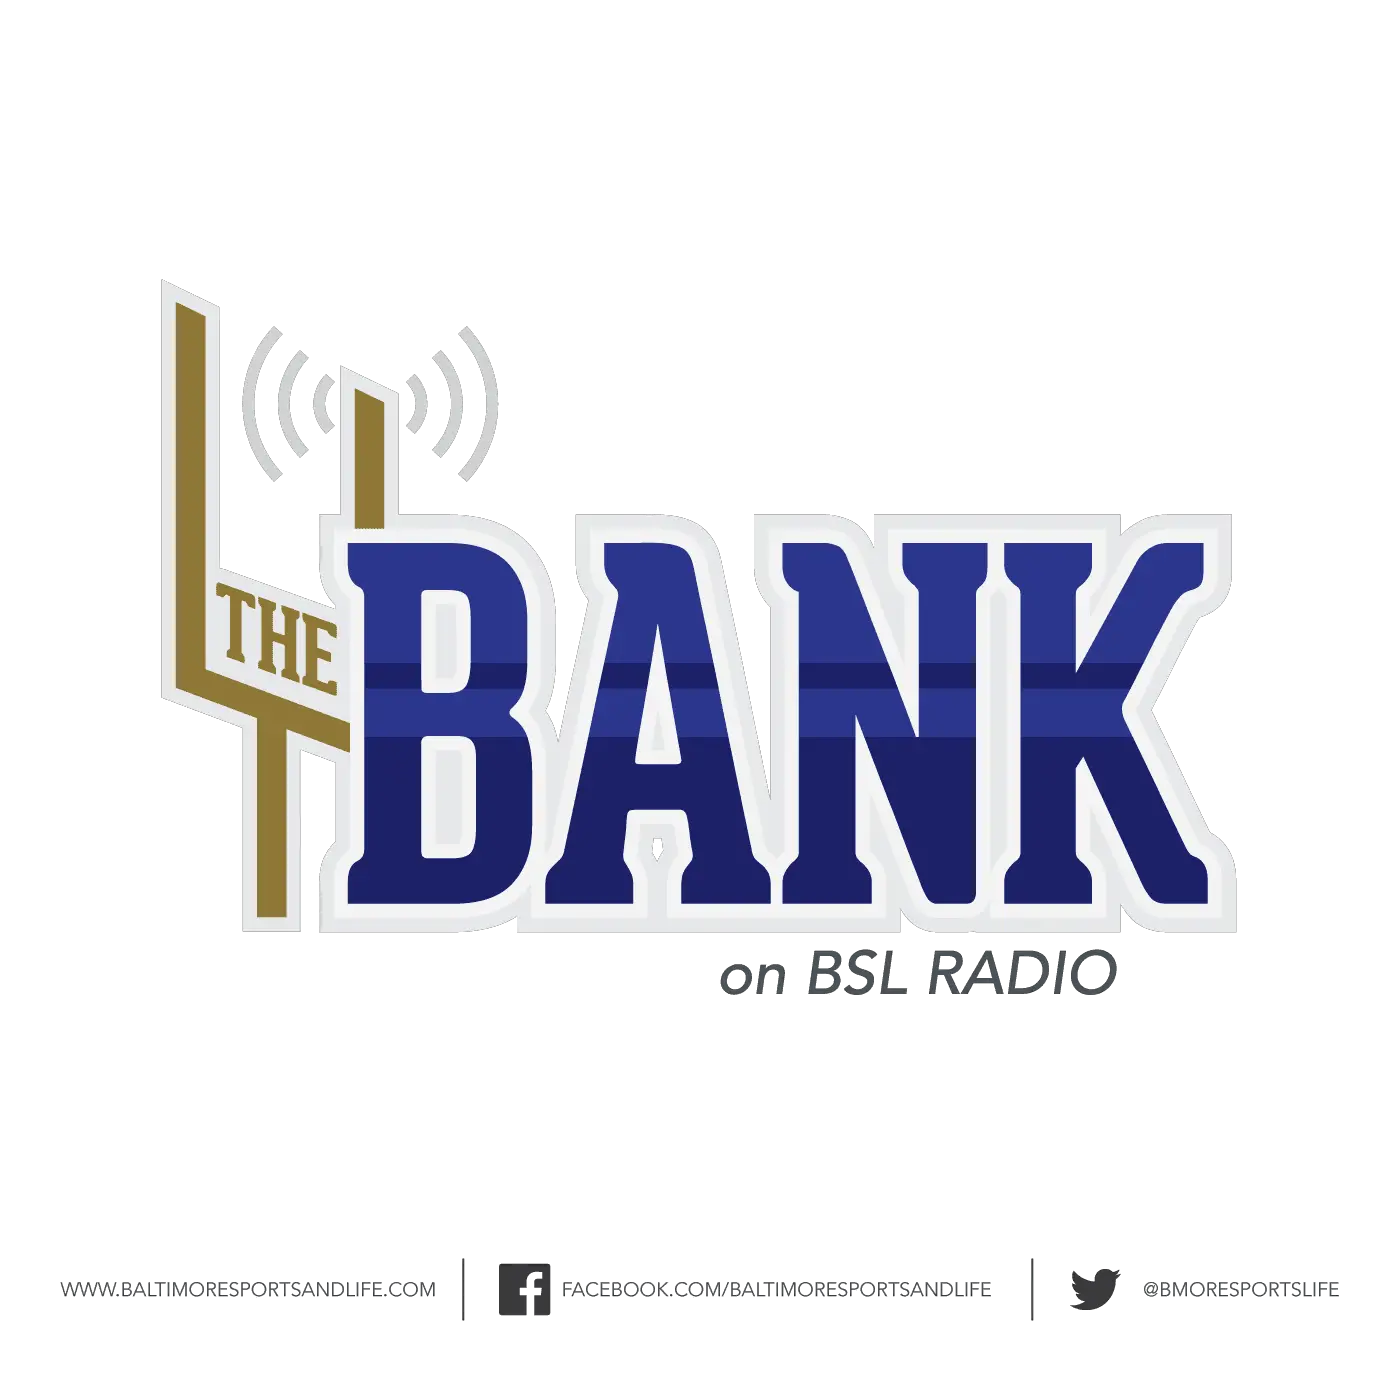 The Bank: Previewing Week 3 vs. The New England Patriots